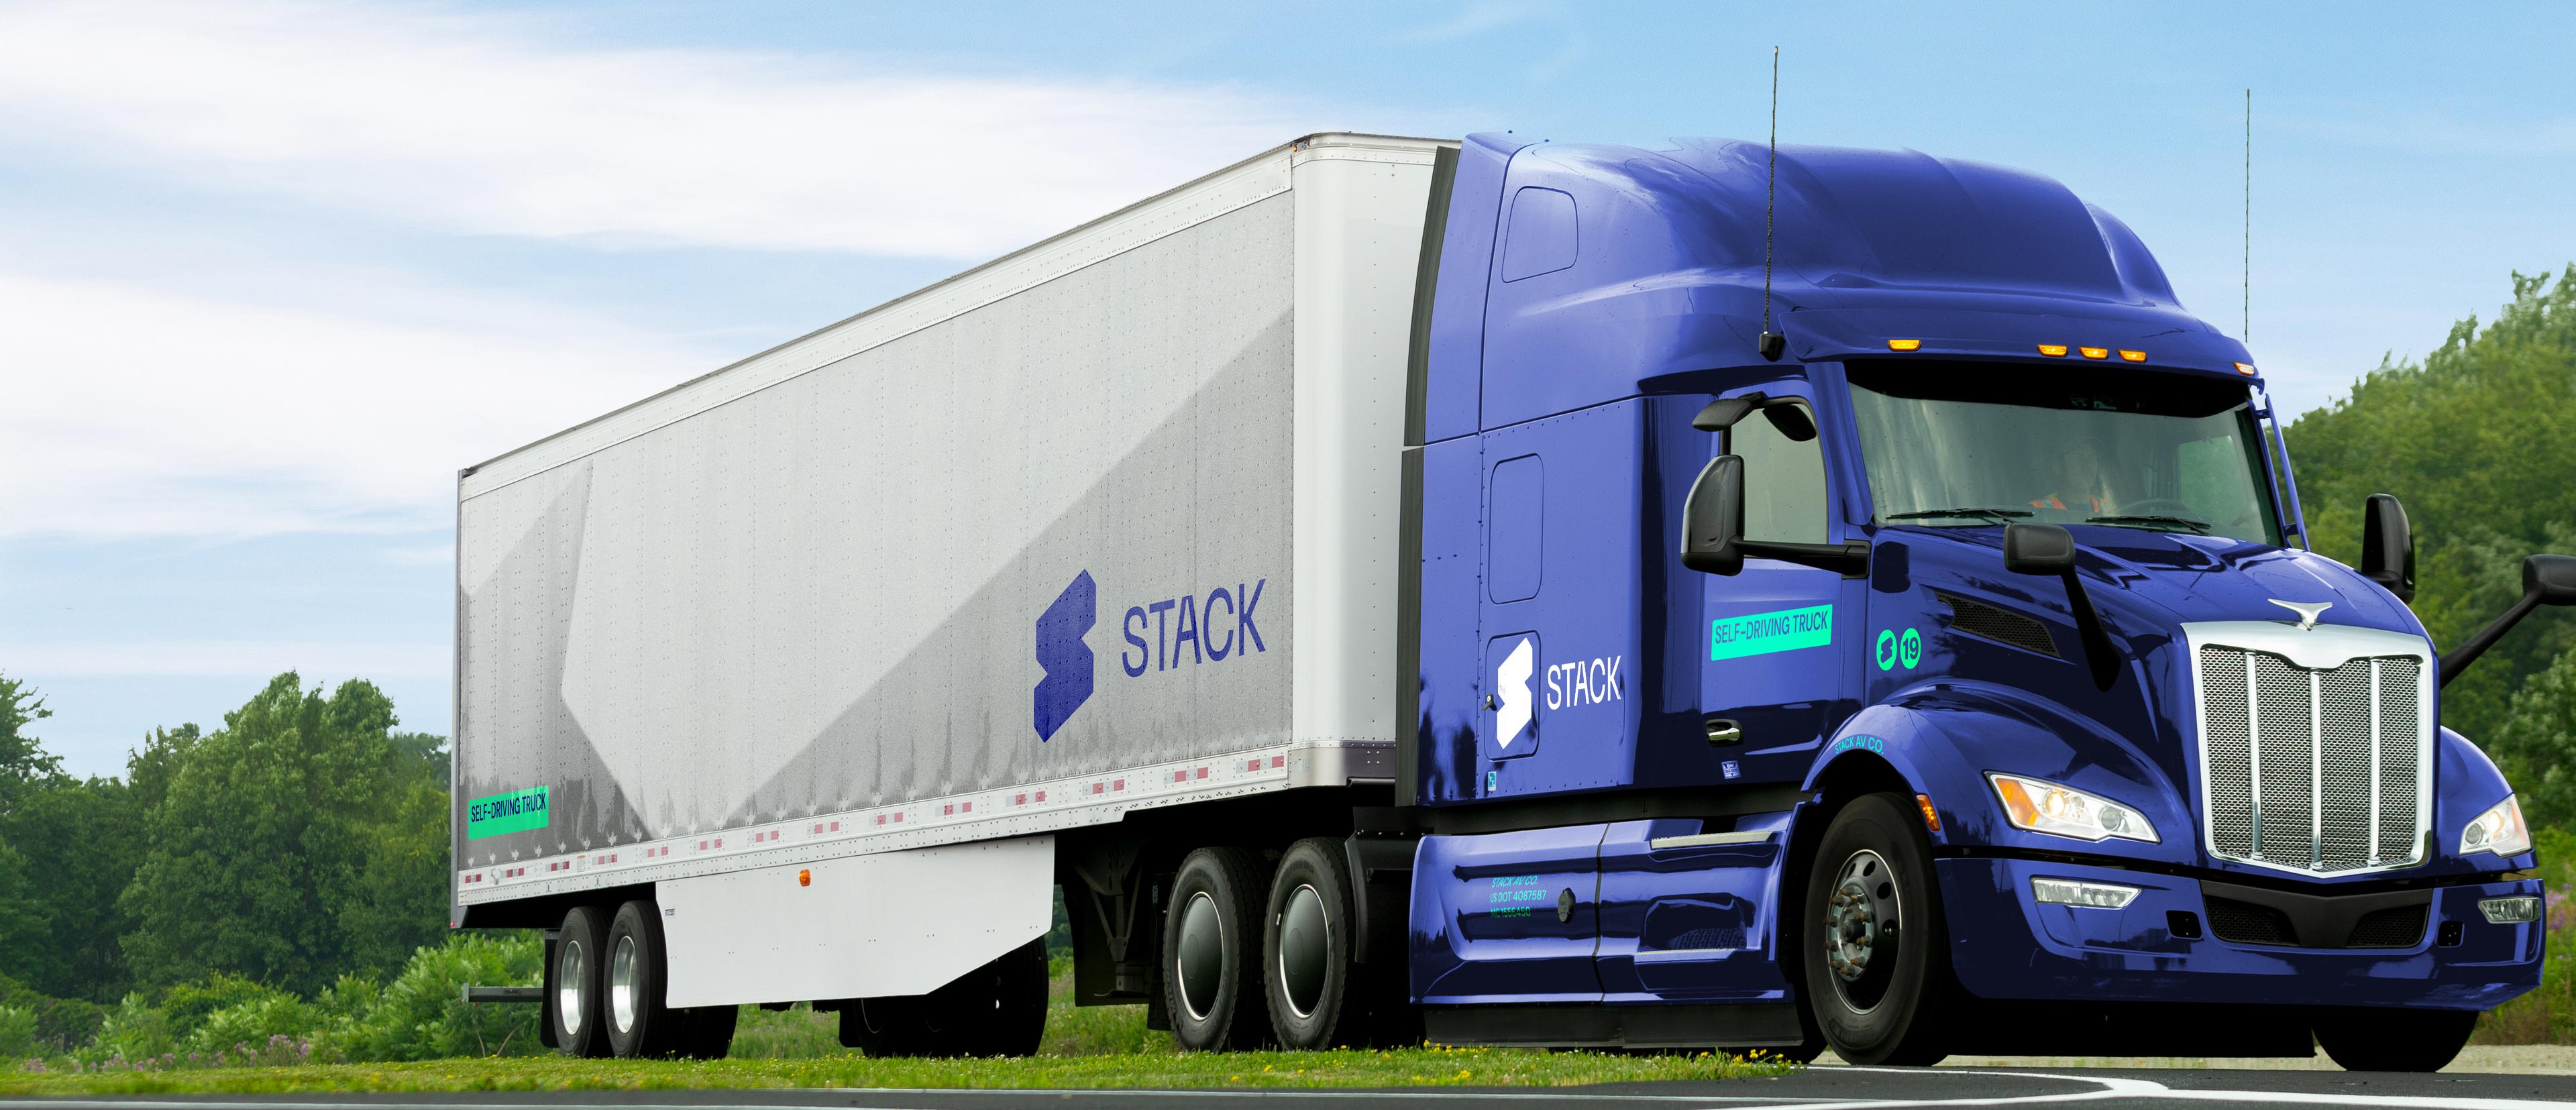 A Stack AV truck on the move